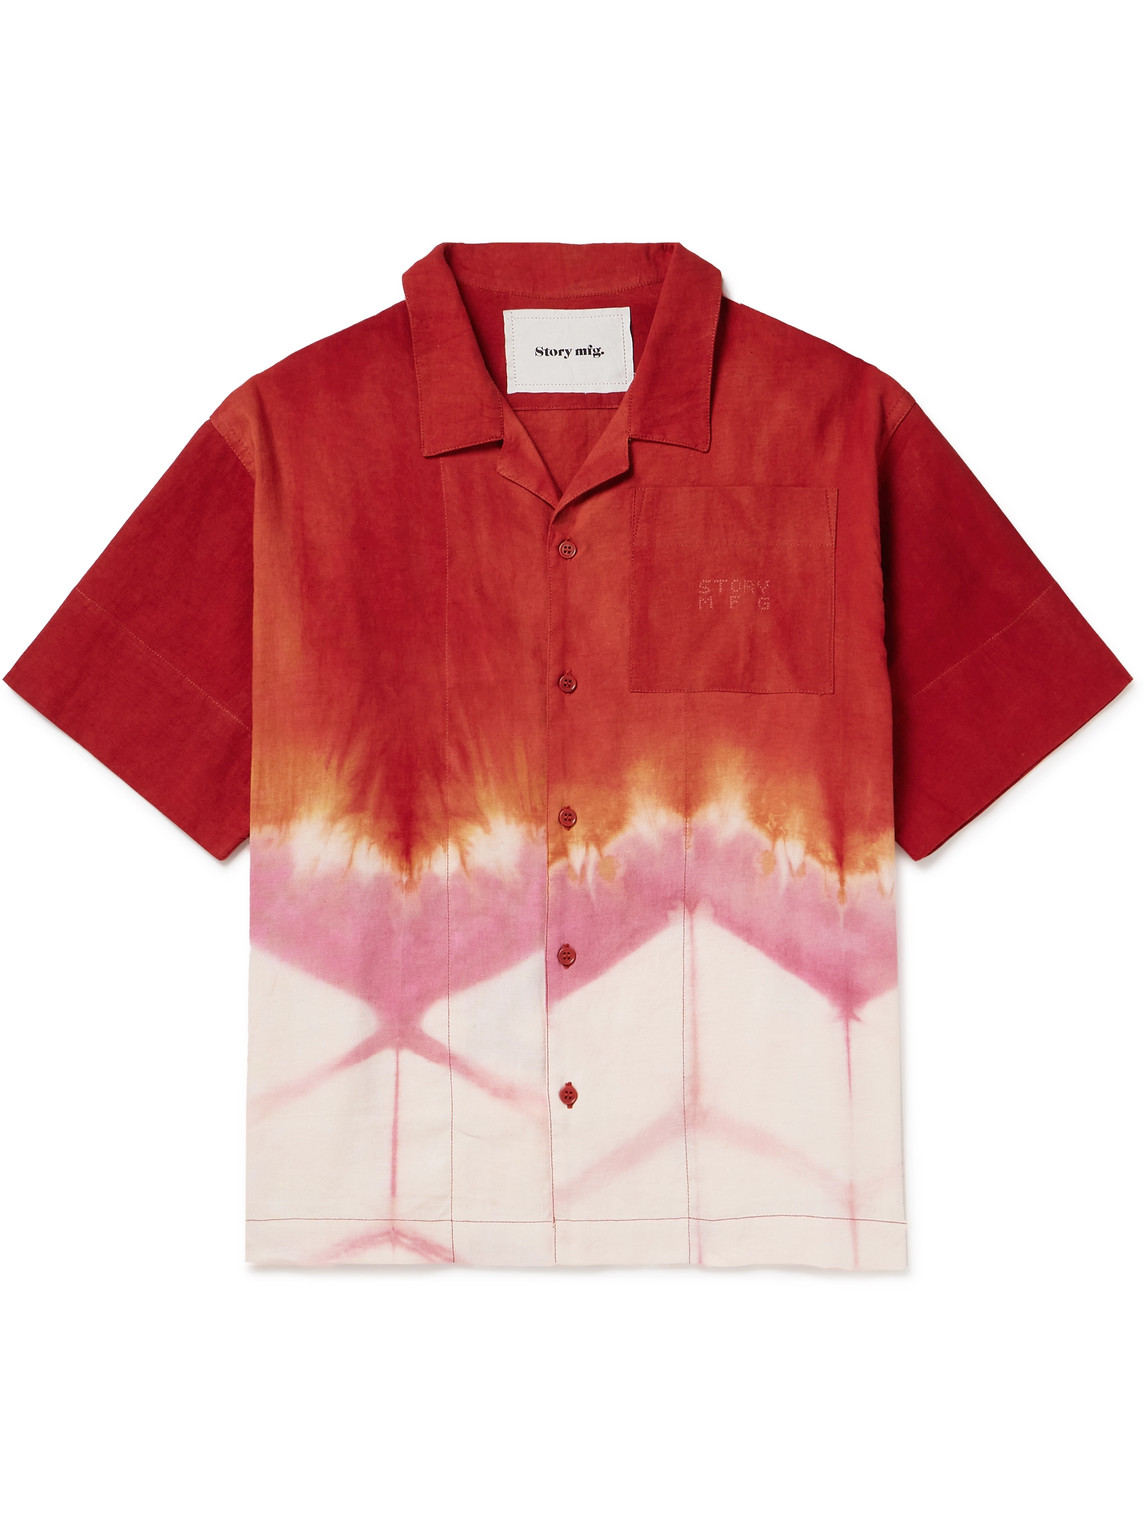 Story Mfg. - Greetings Camp-Collar Tie-Dyed Cotton and Linen-Blend Shirt - Men - Red - S von Story Mfg.